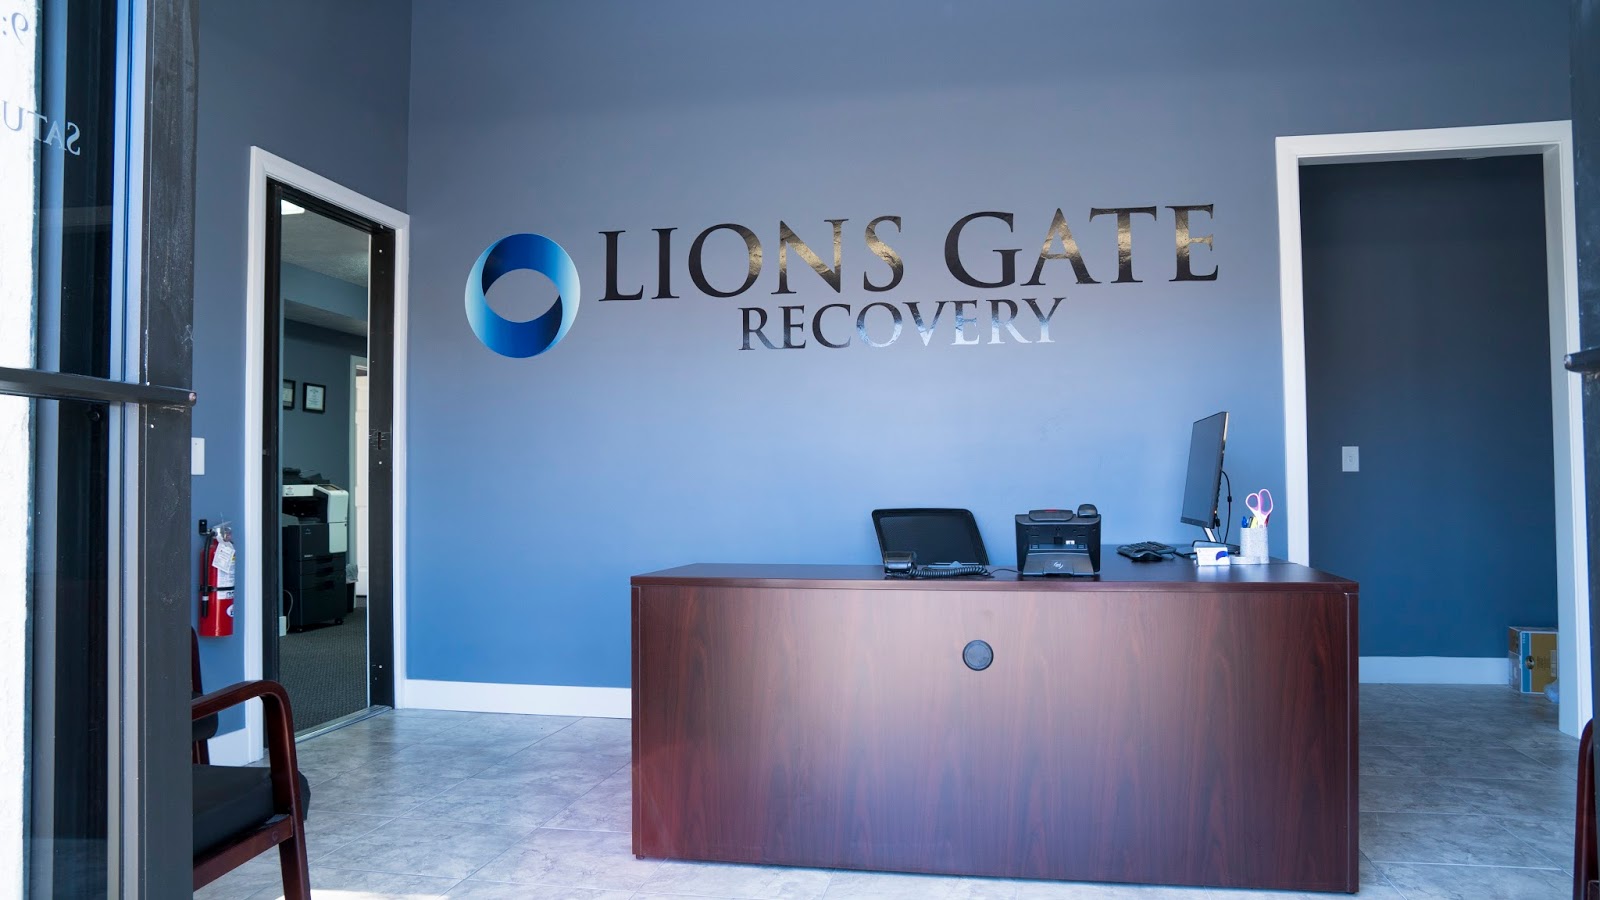 Lion's Gate Recovery - St. George Campus